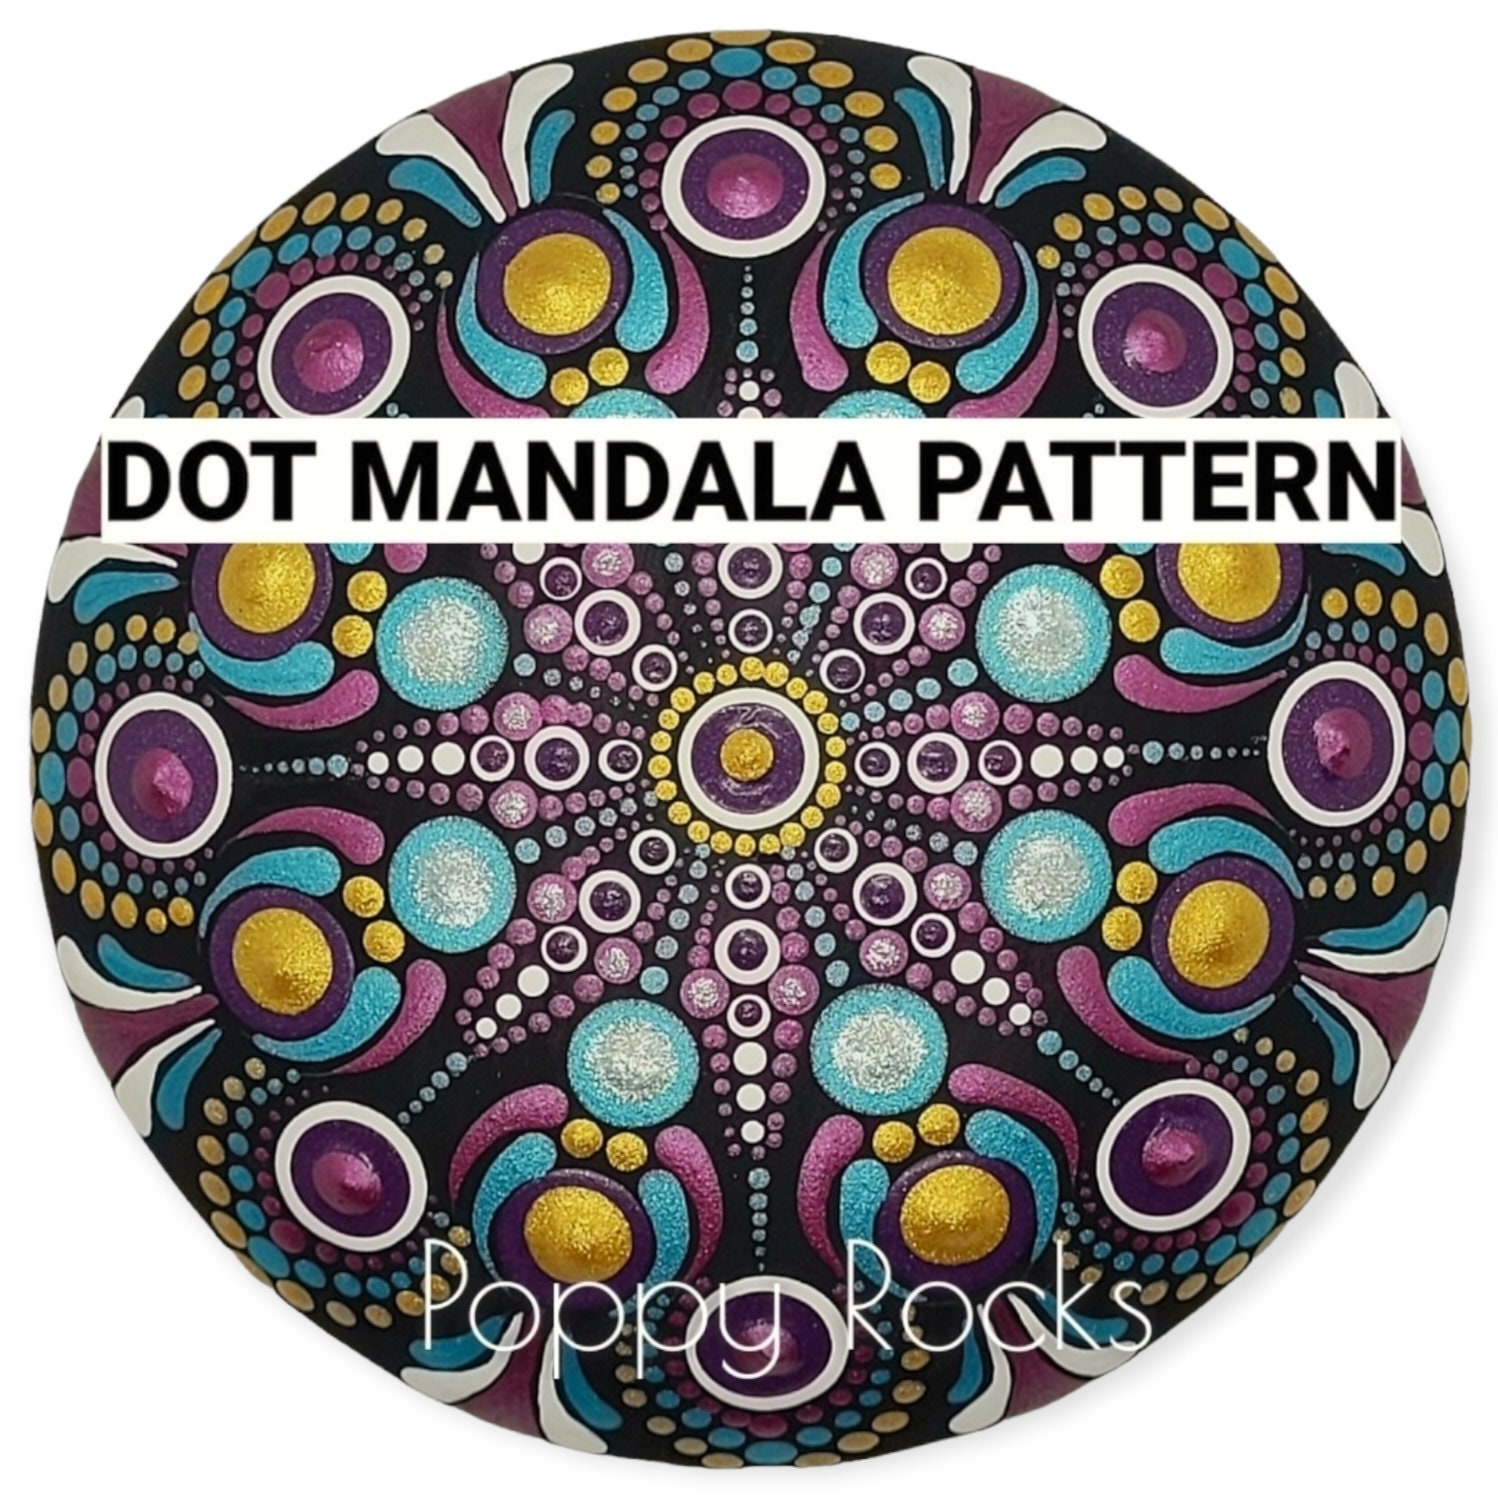 Intro to Mandalas 2: Dots and Swooshes